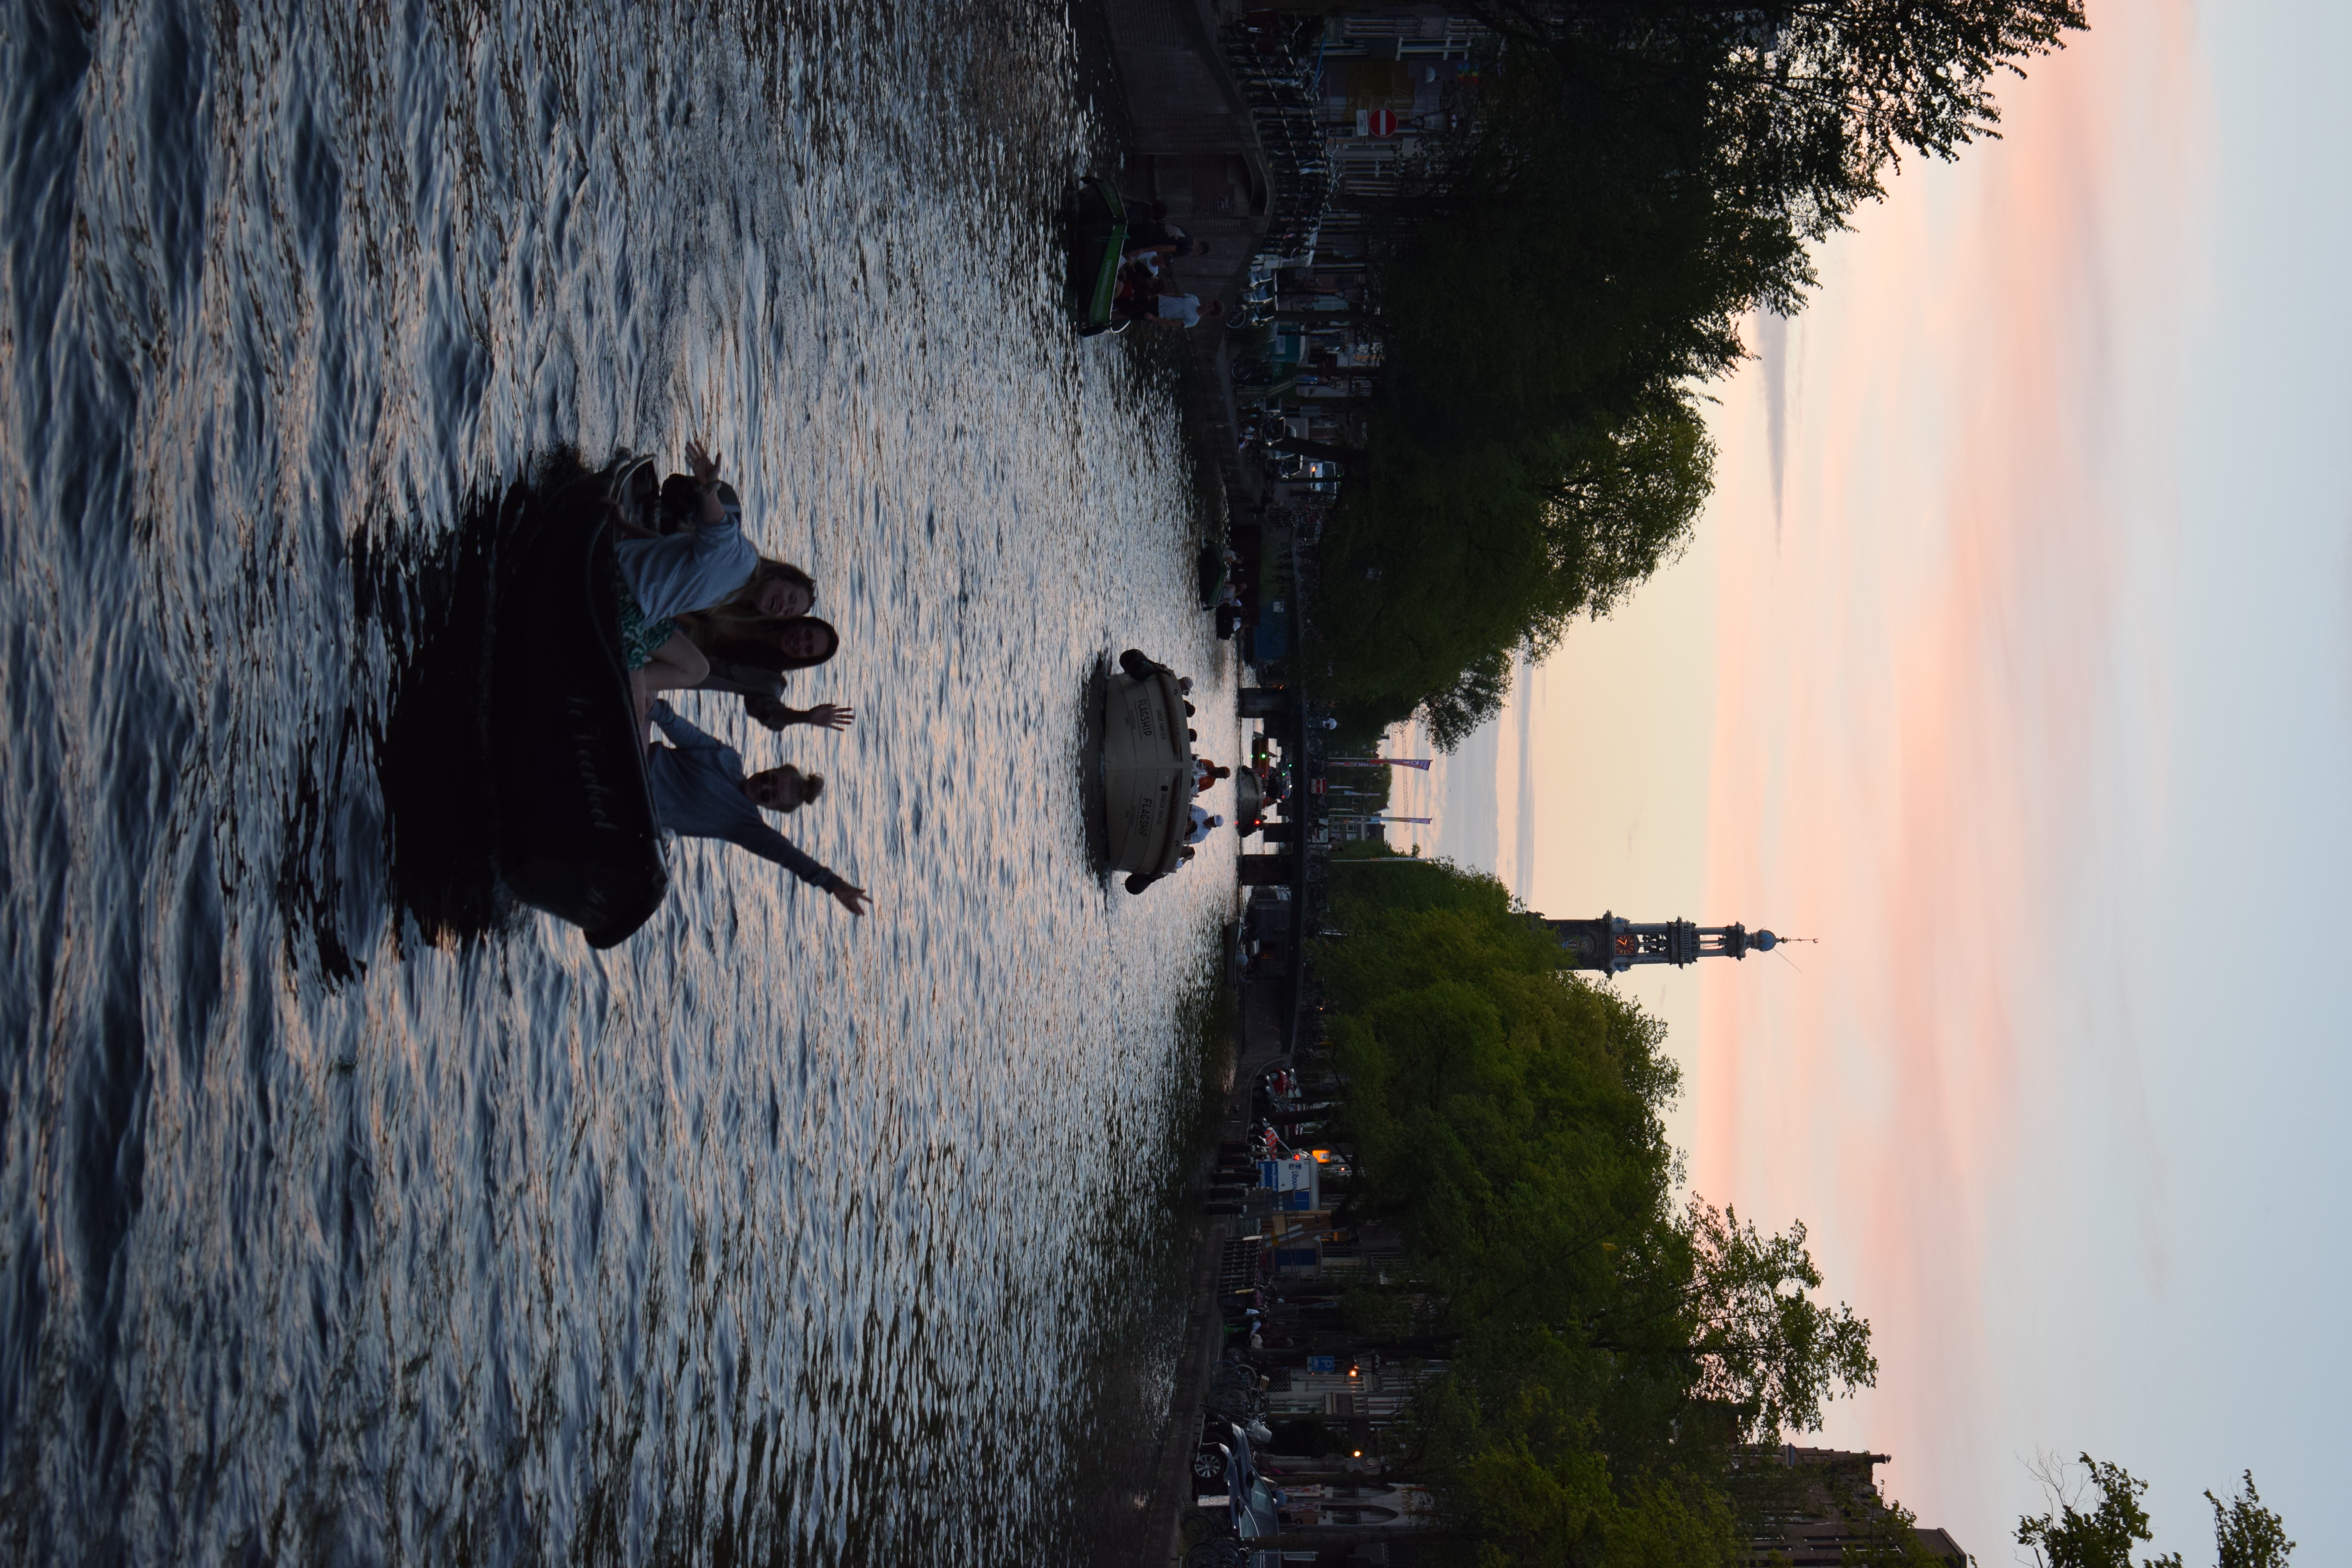 A photo I took of three people waving from a boat on a canal in Amsterdam.